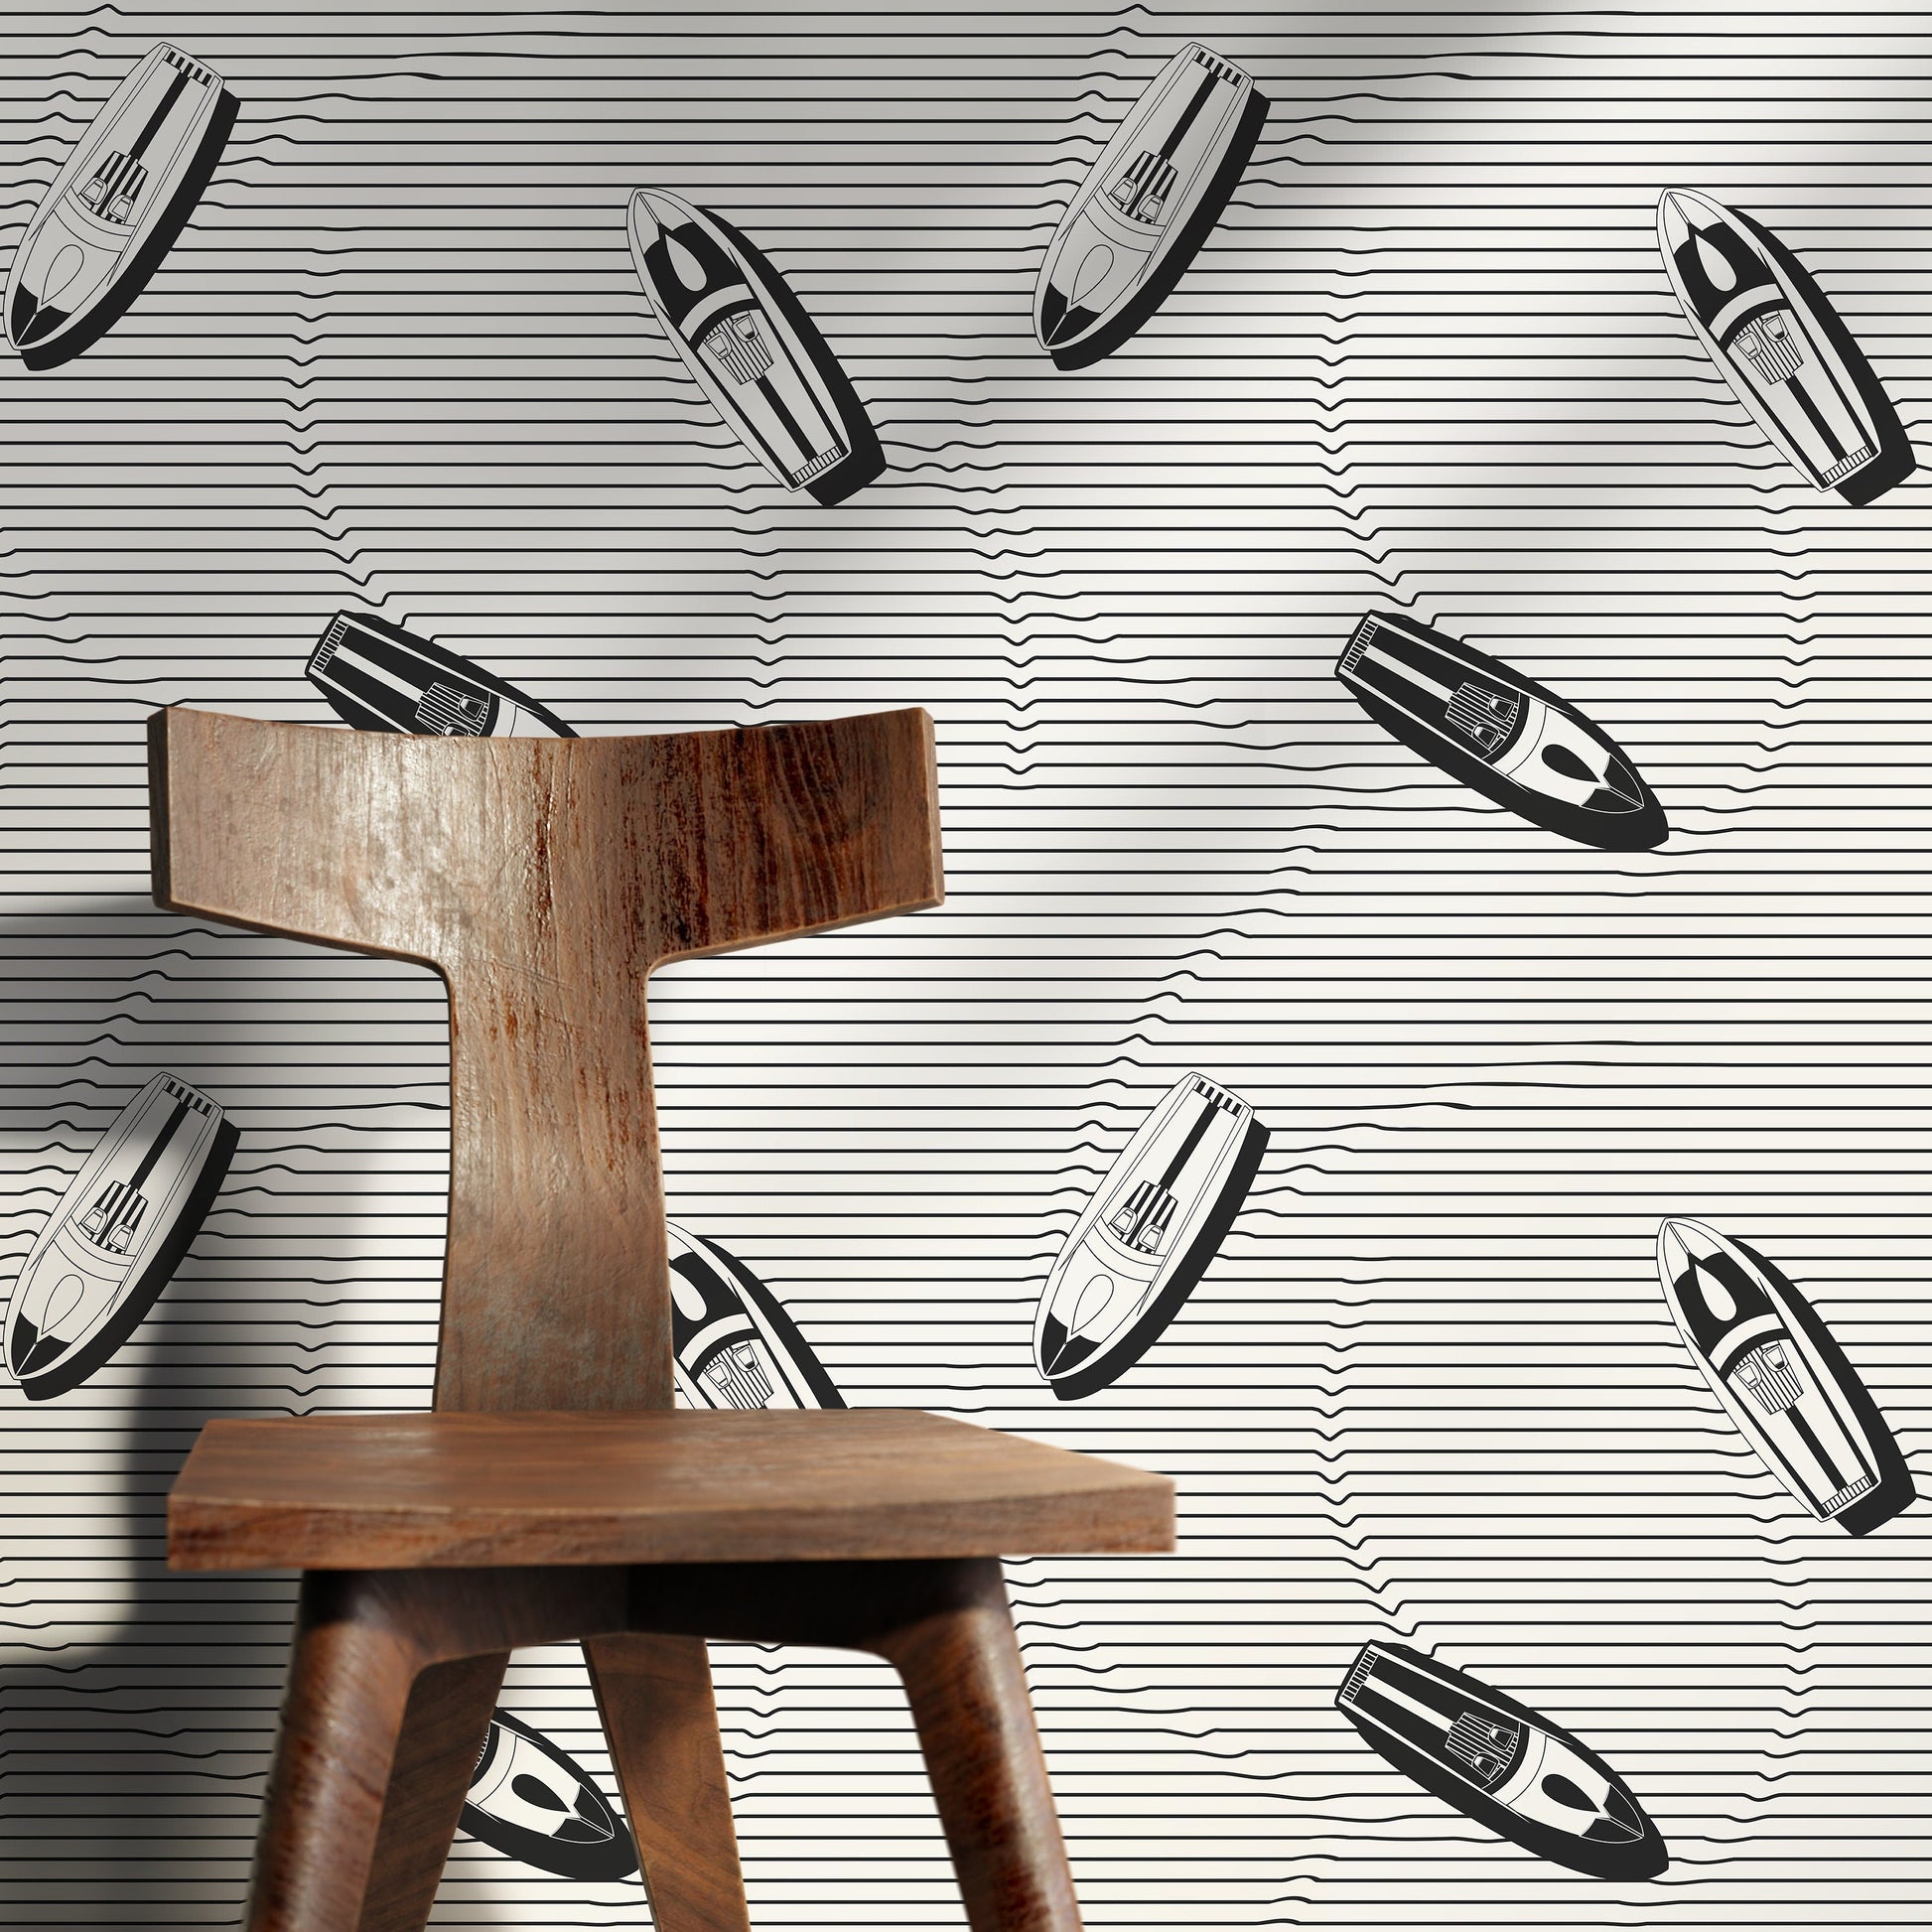 Wallpaper Peel and Stick Wallpaper Removable Wallpaper Home Decor Wall Art Wall Decor Room Decor / Black And White Boat Wallpaper - C334